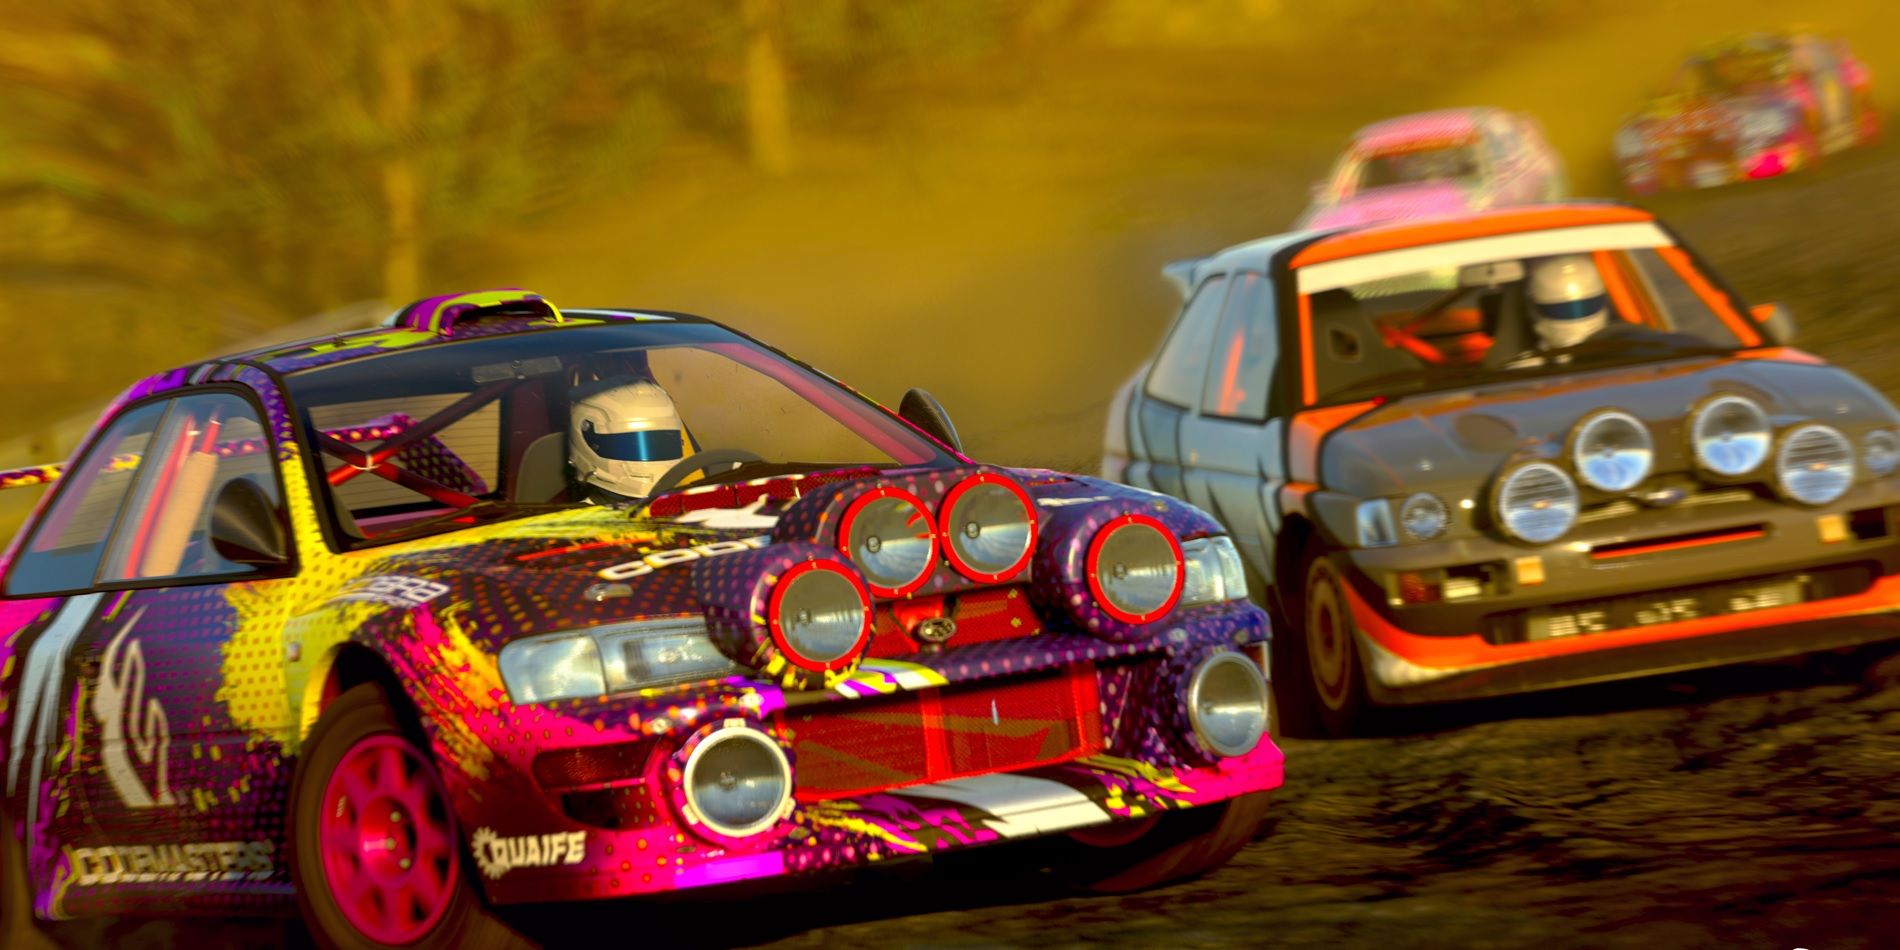 Screenshot from the upcoming off-road racer Dirt 5.